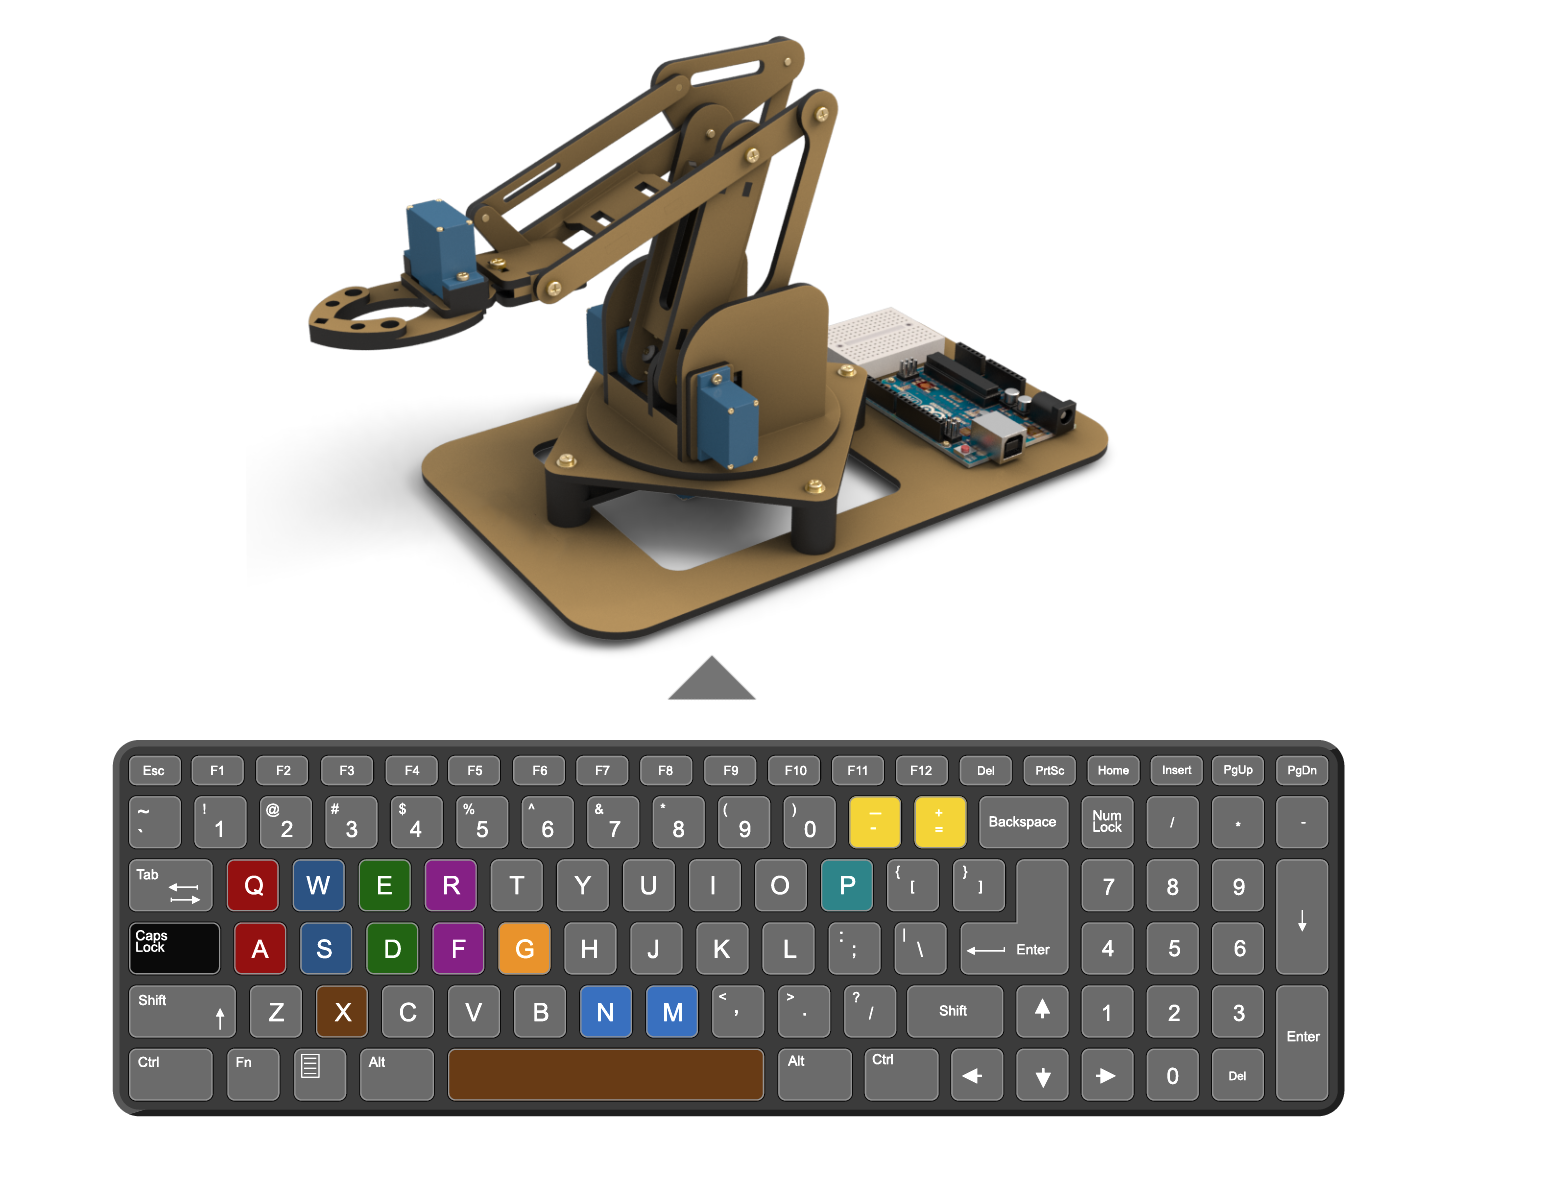 CONTROL CODE FOR ROBOTIC ARMS VIA PC KEYBOARD